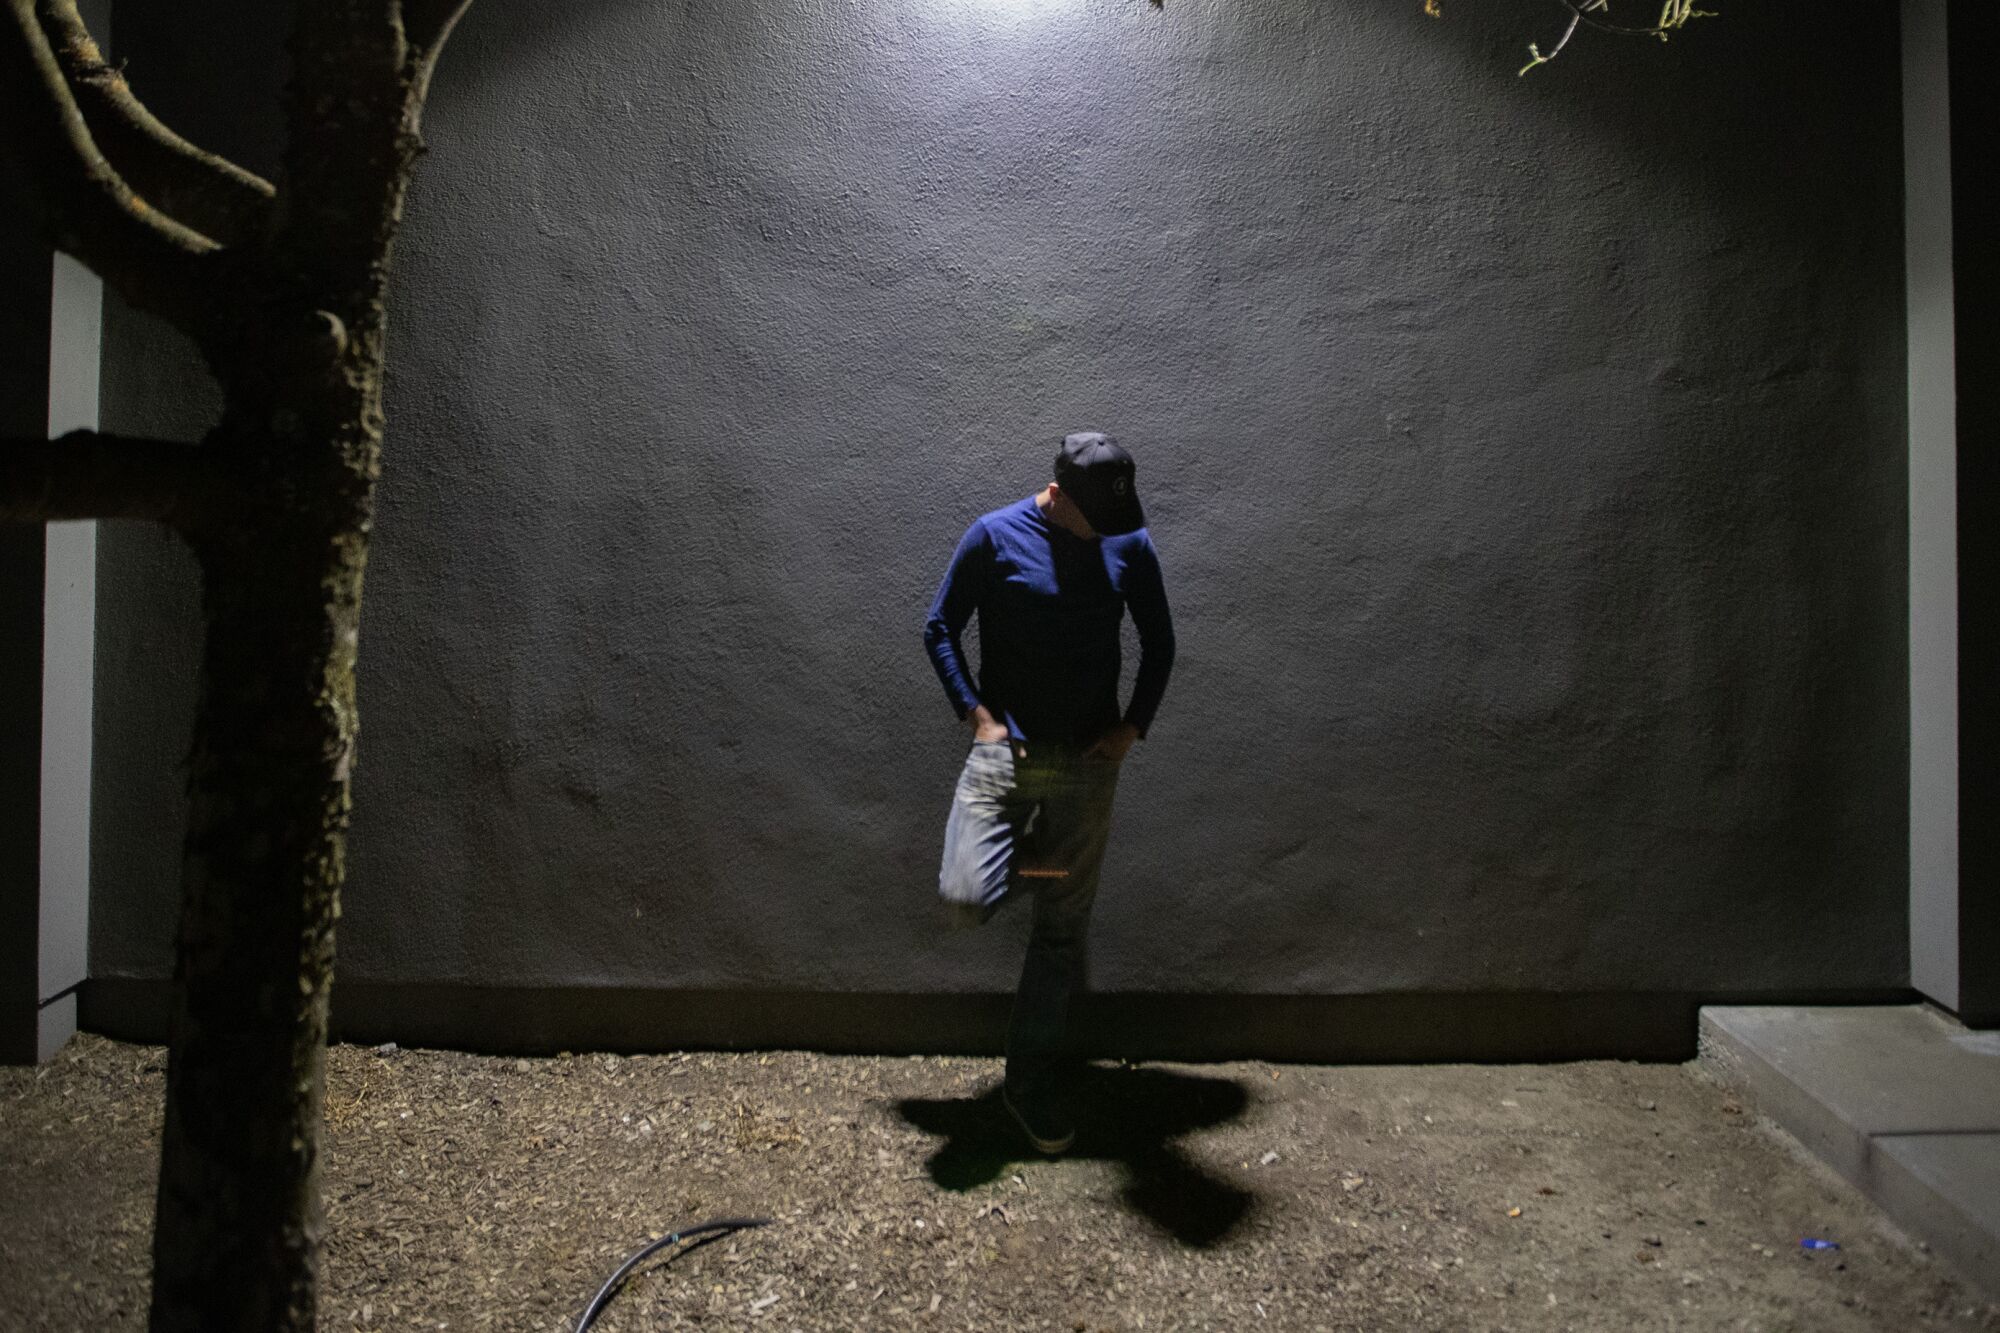 A foreign worker stands in the shadows,
                      obscuring his face.